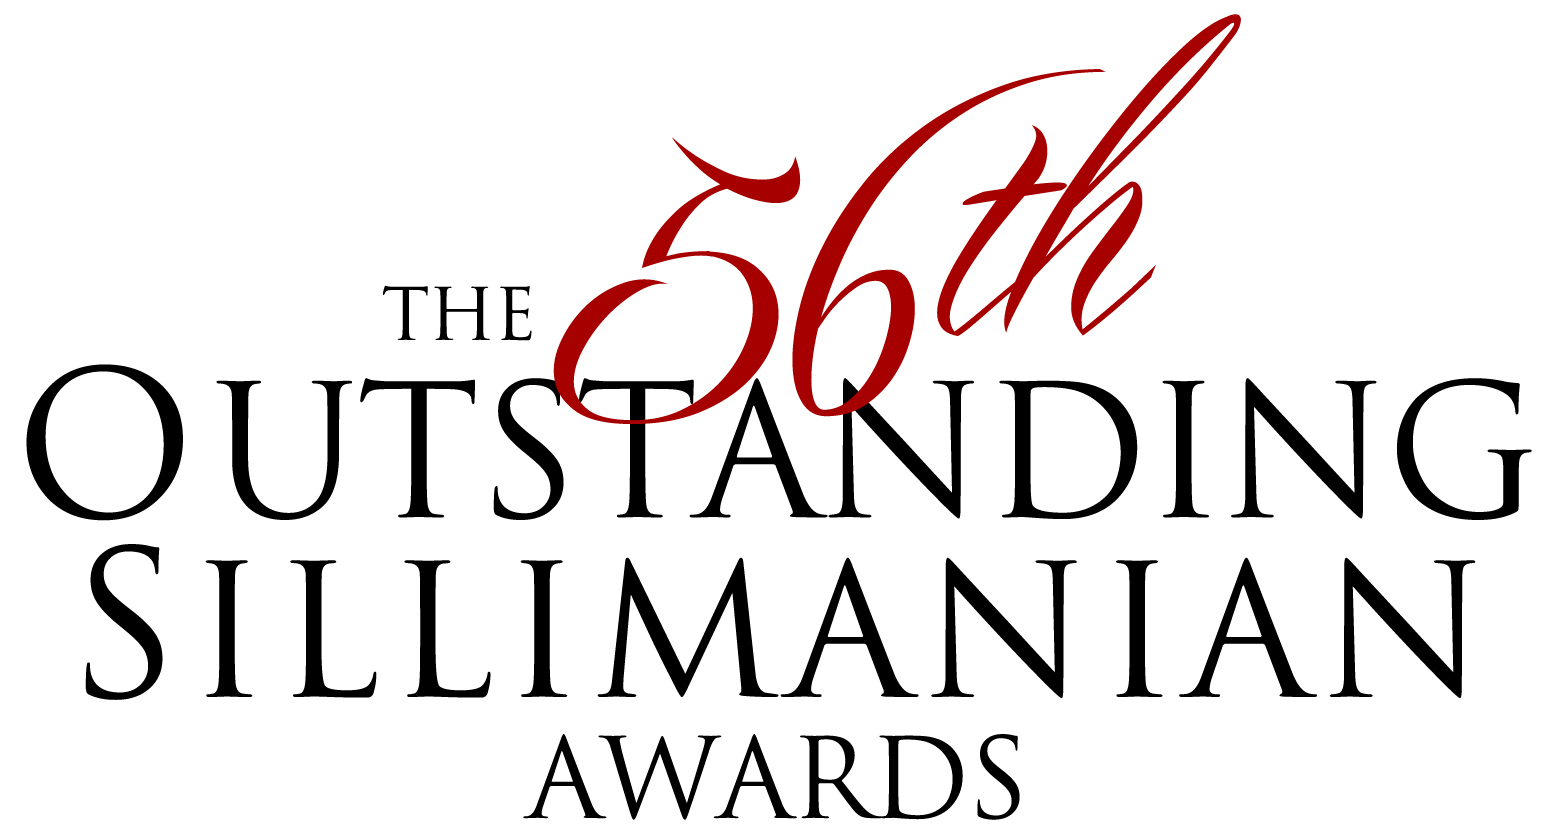 Silliman honors three outstanding alumni